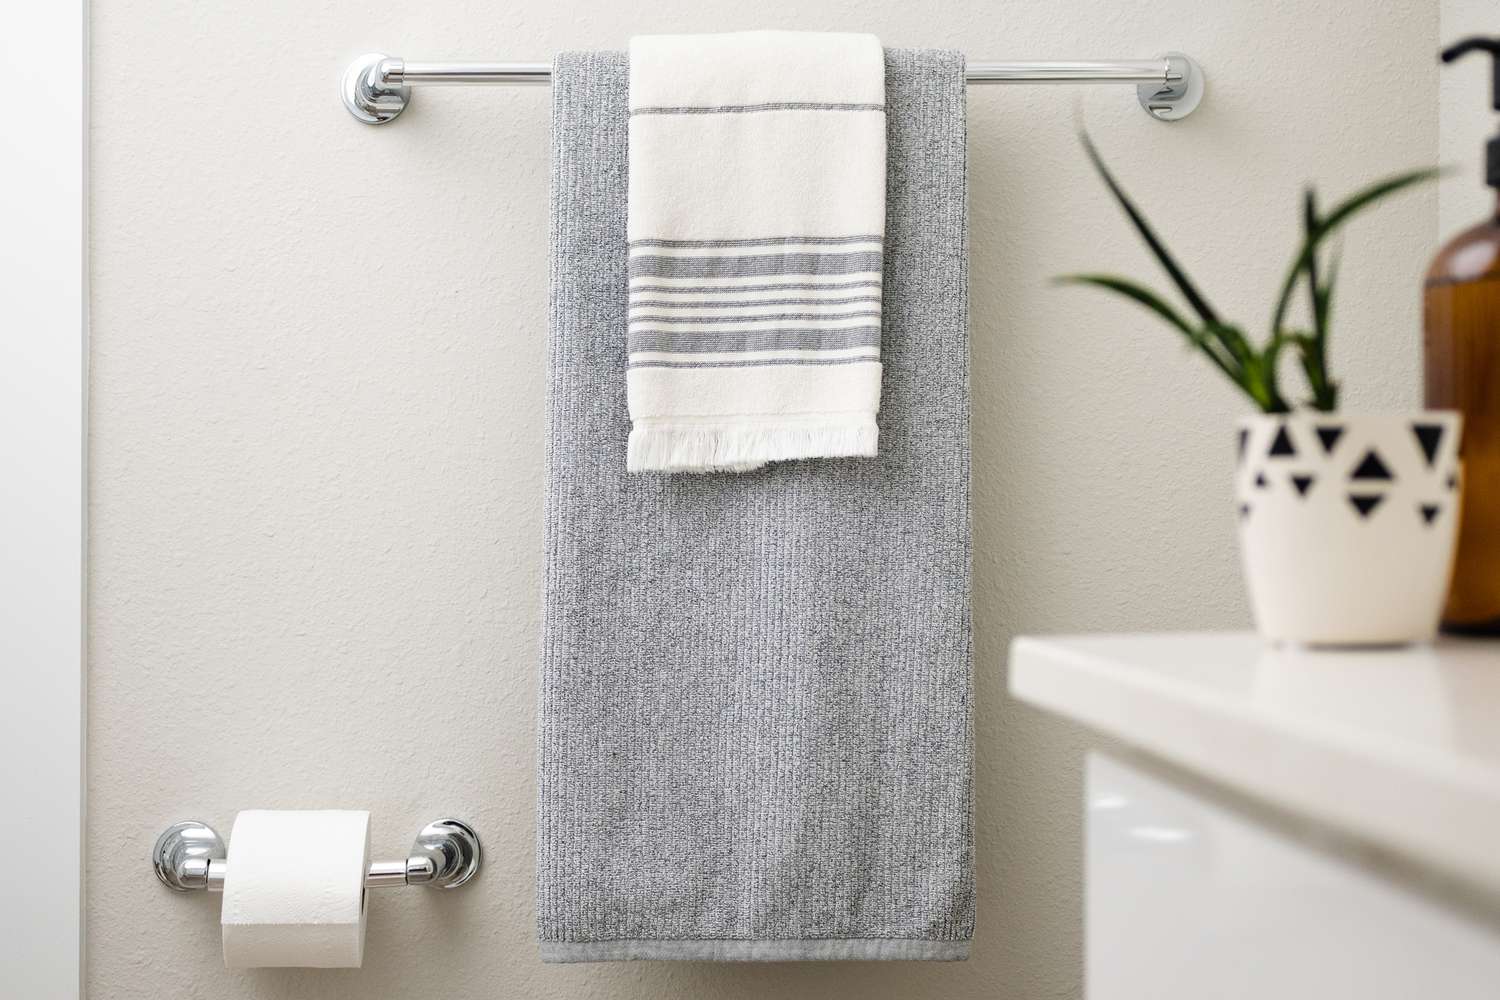 Towel Holder Trends: What’s Hot in Bathroom Decor This Year